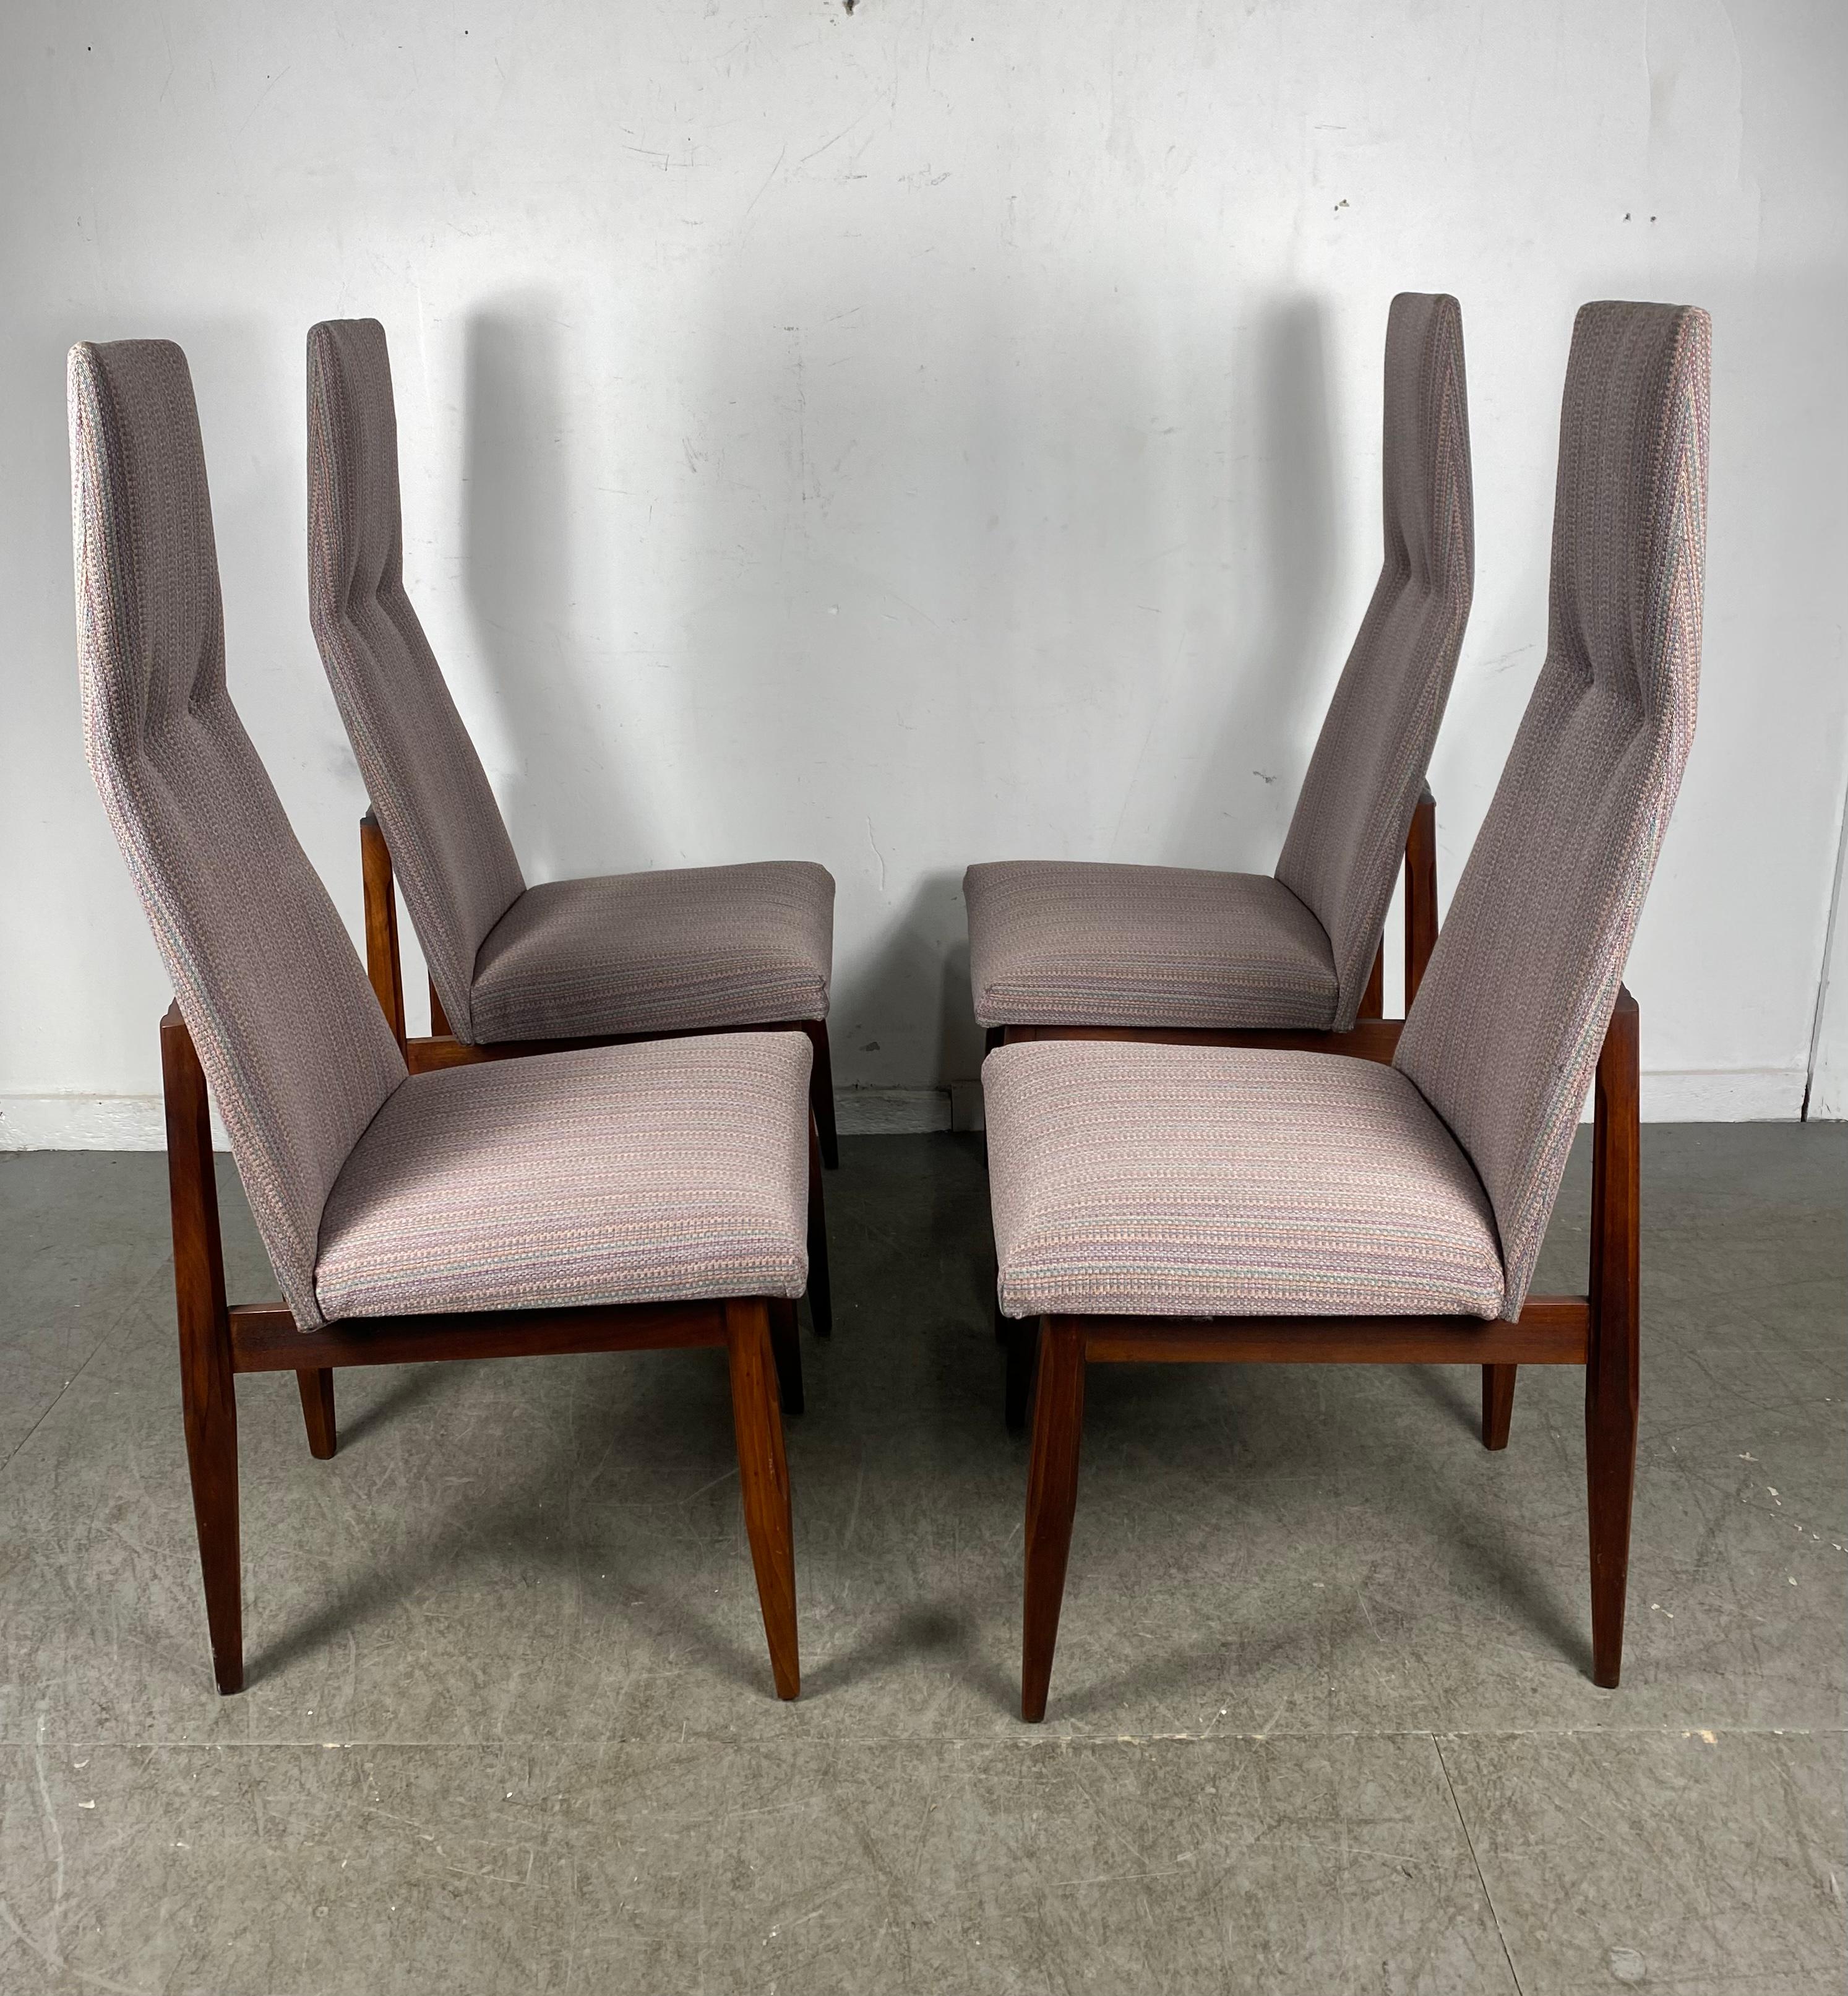 Mid-20th Century High Back Sculptural Walnut and Fabric Chairs Attributed to Adrian Pearsall For Sale